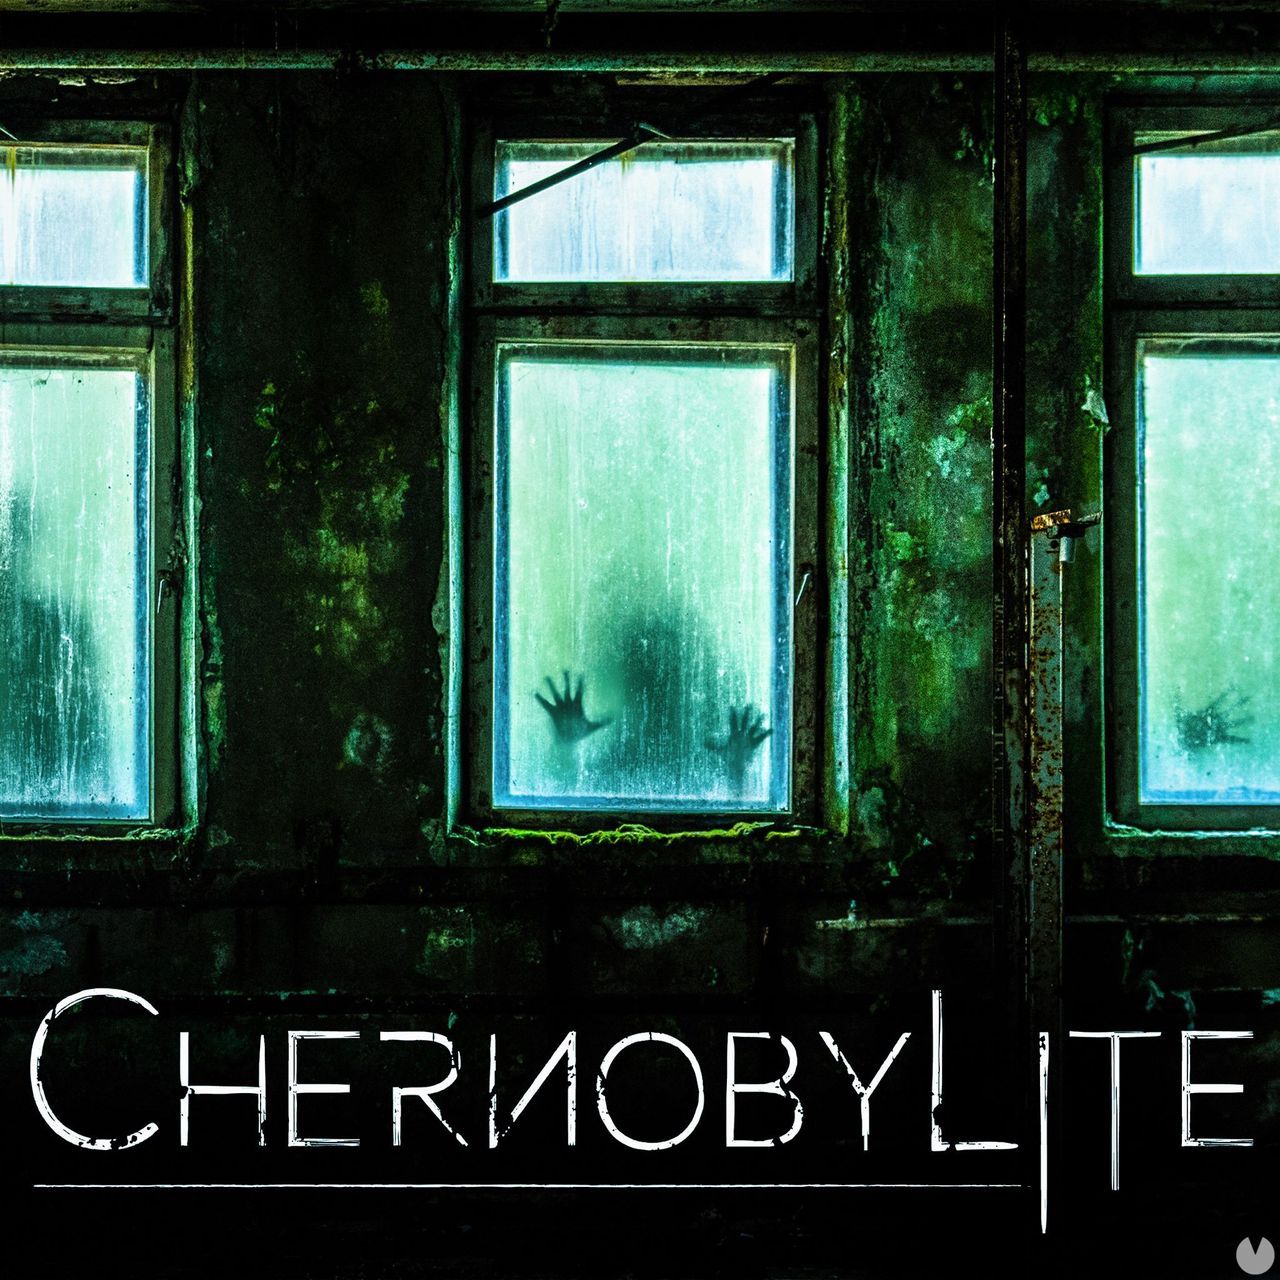 chernobylite ps4 review